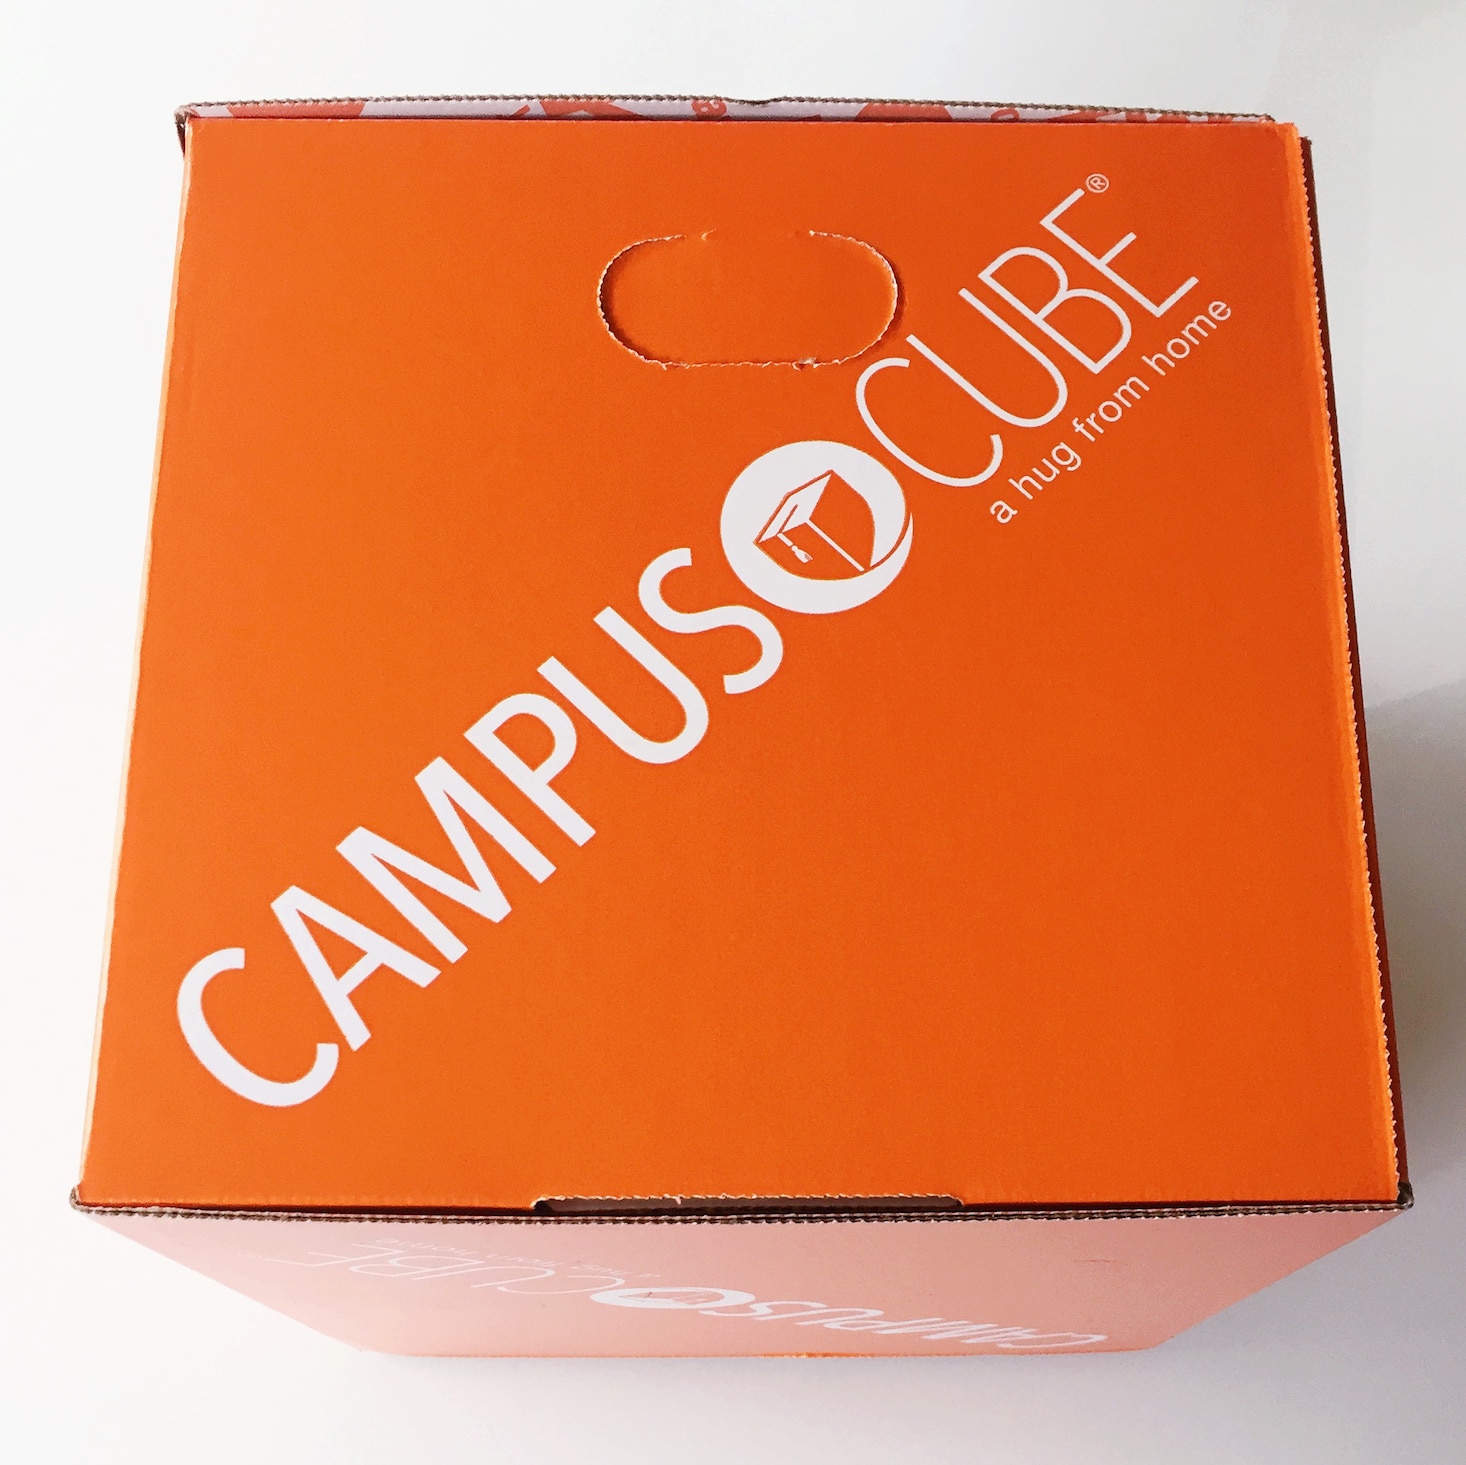 CampusCube Exam Survival College Care Package Review + Coupon